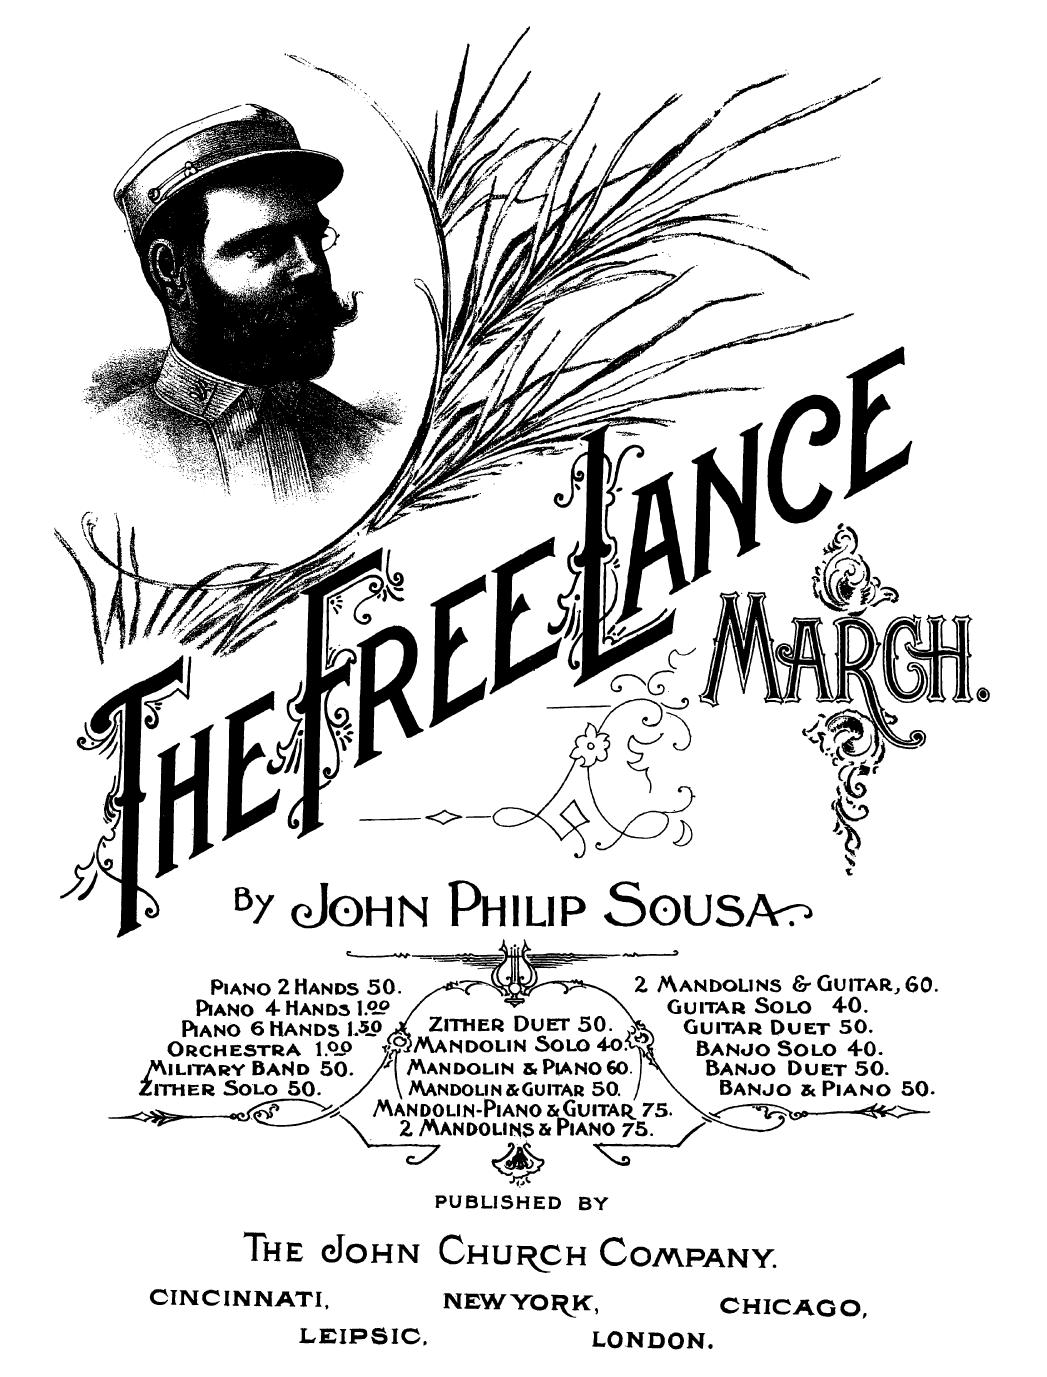 John Philip Sousa by The Free-Lance March. Pianosolo (1906)